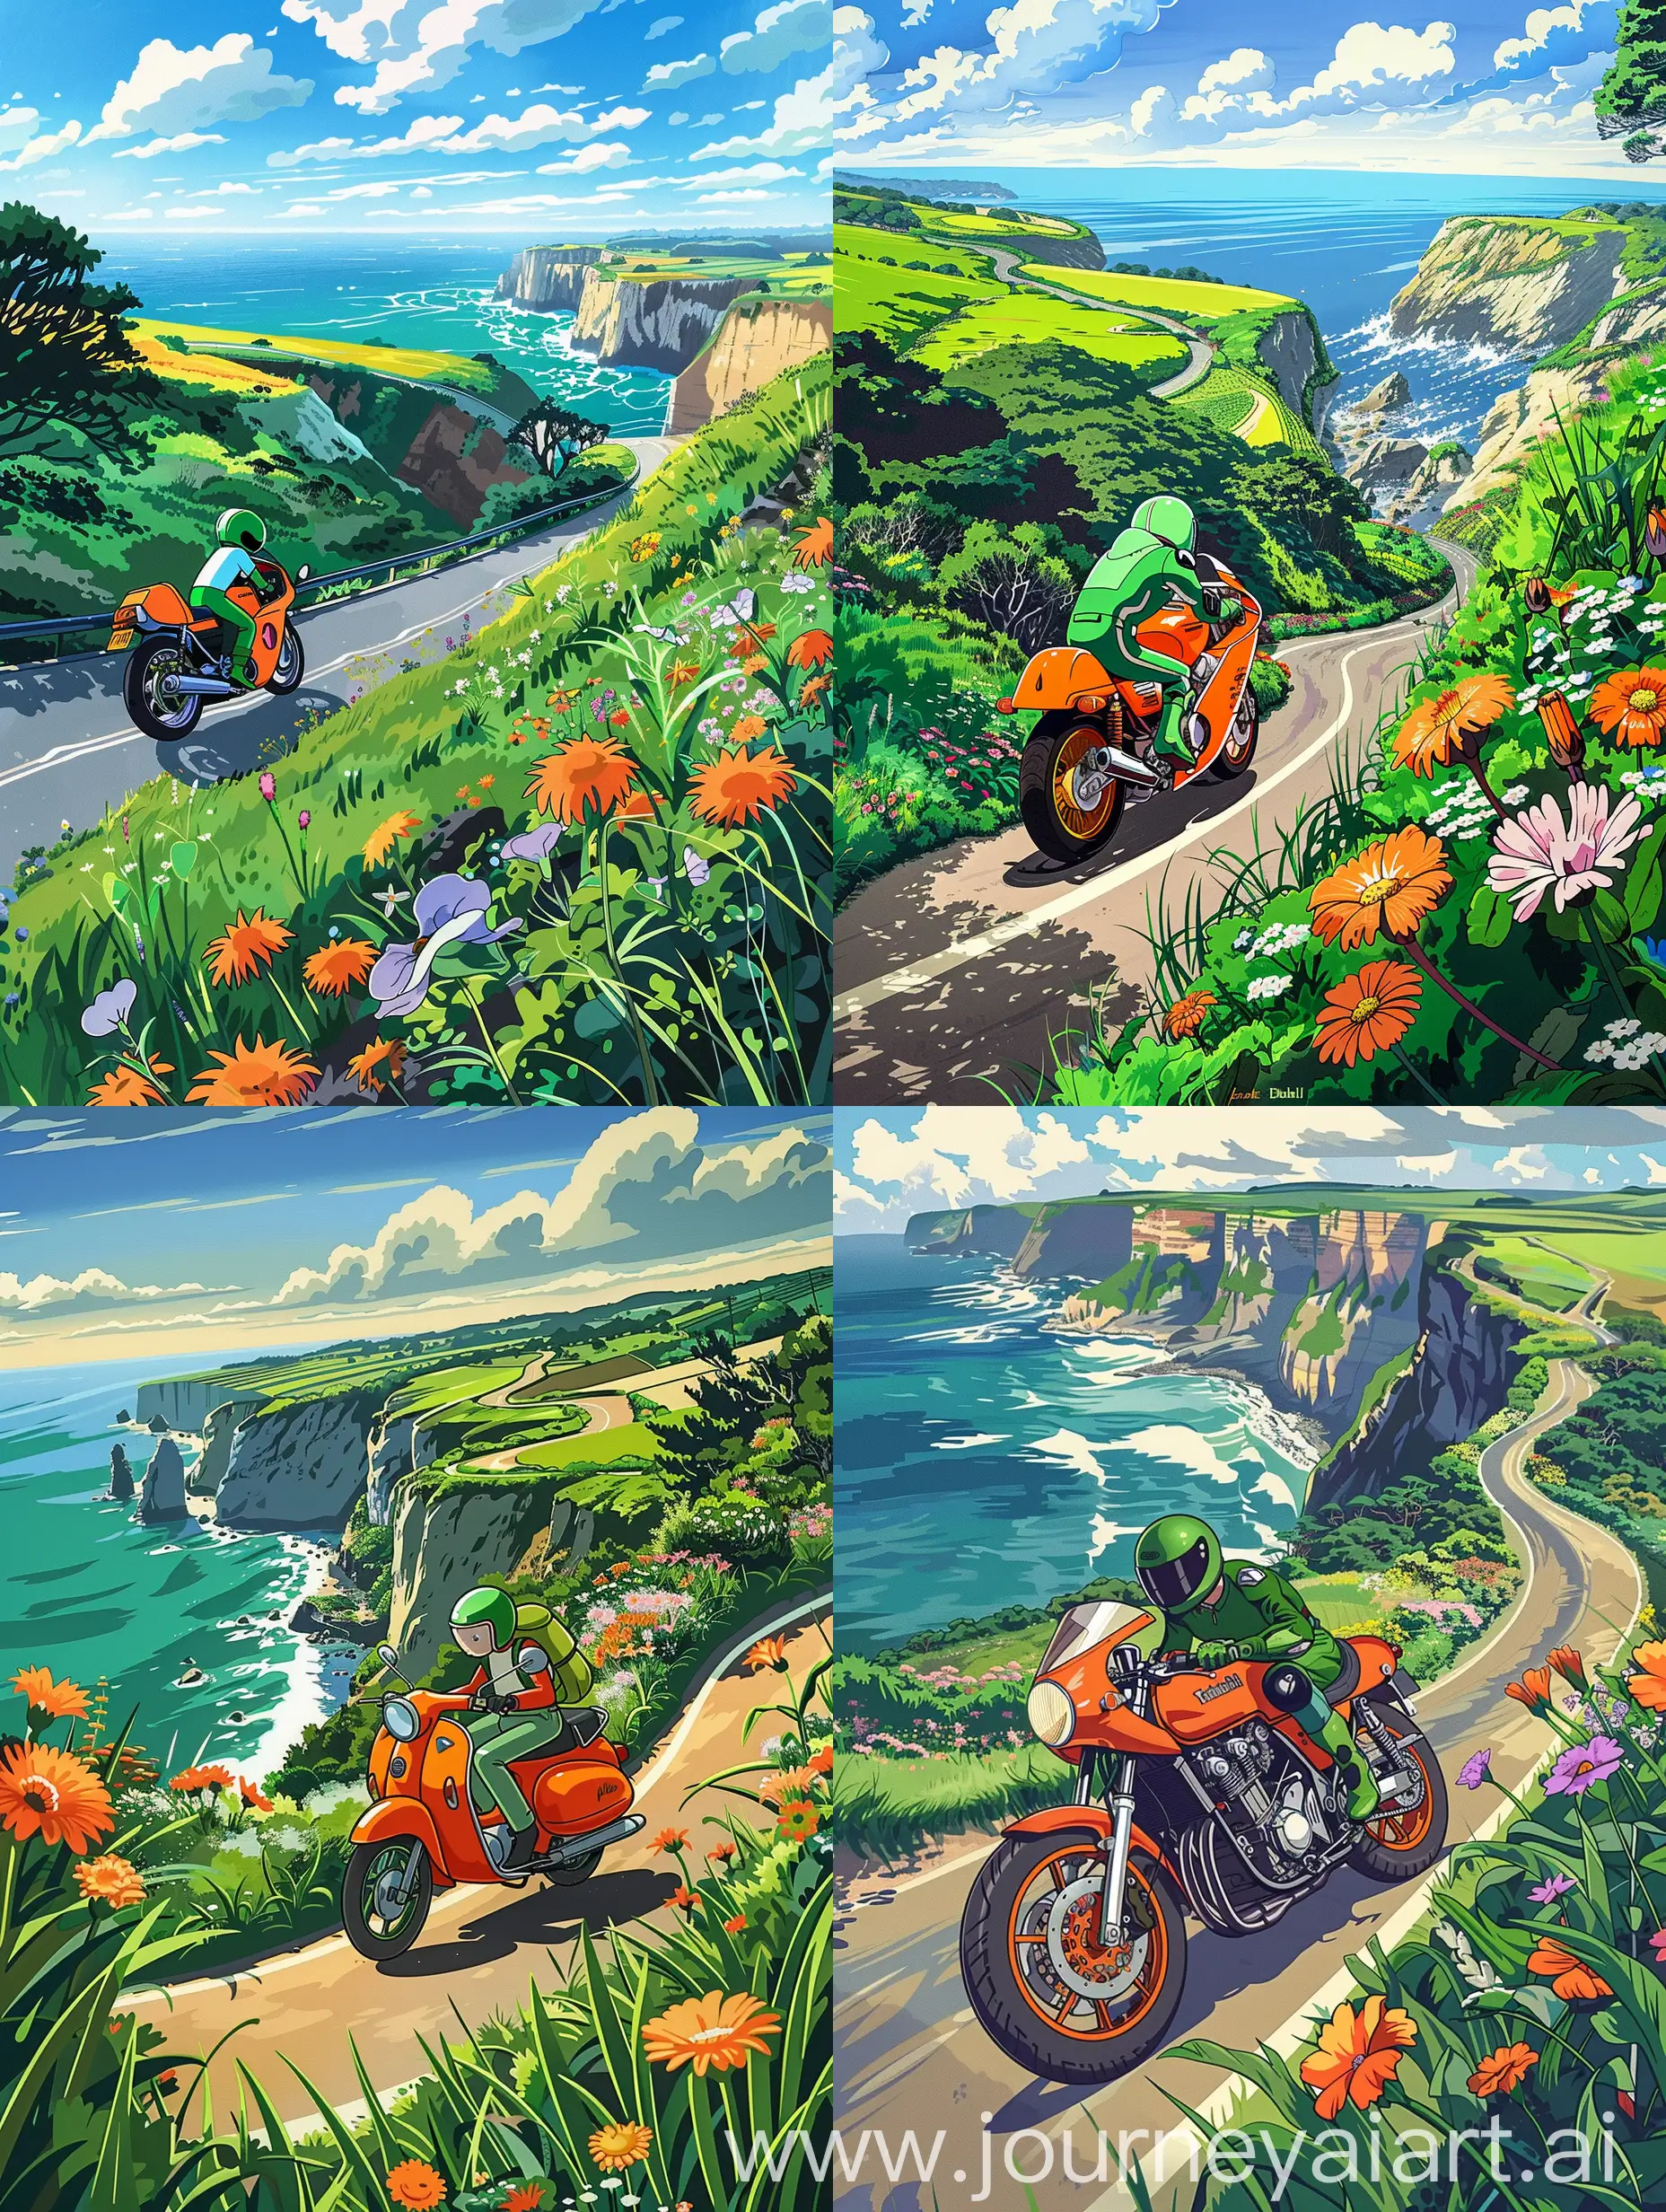 Studio Ghibli art,cel shading,a orange motorcycle with a rider wearing green helmet running down on a winding coastal road,overlooking a vast ocean and a lush green cliffs,flowers,grasses,trees,sunny day,vibrant colors,cinematic